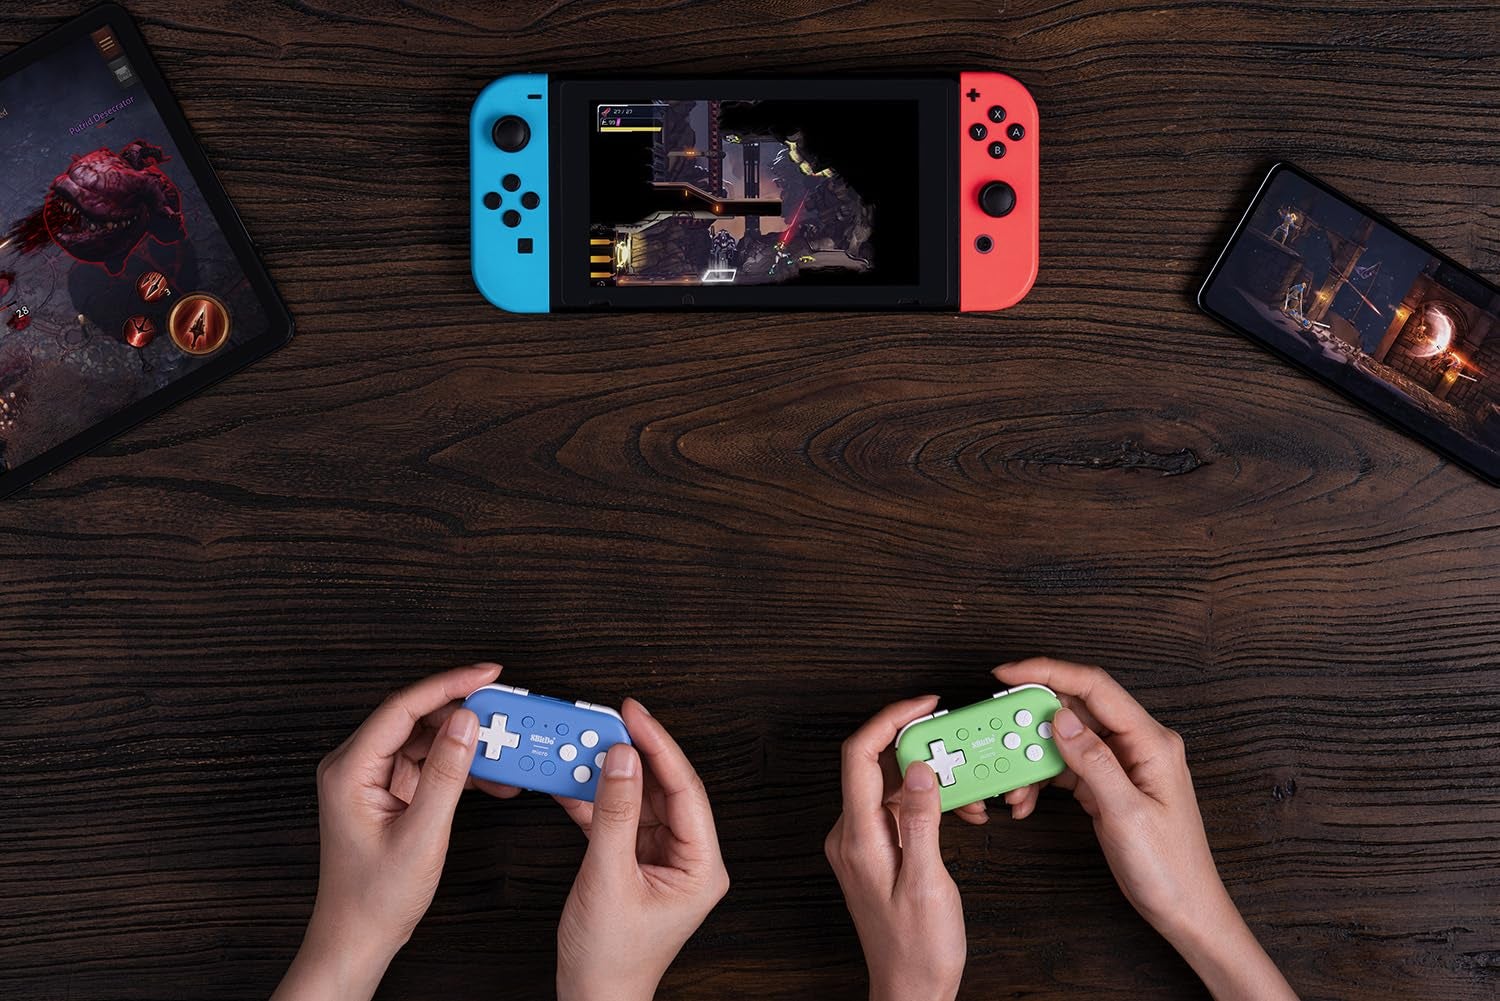 8BitDo’s lovely Micro controller is ideal for teeny tiny retro gaming | Digital Noch